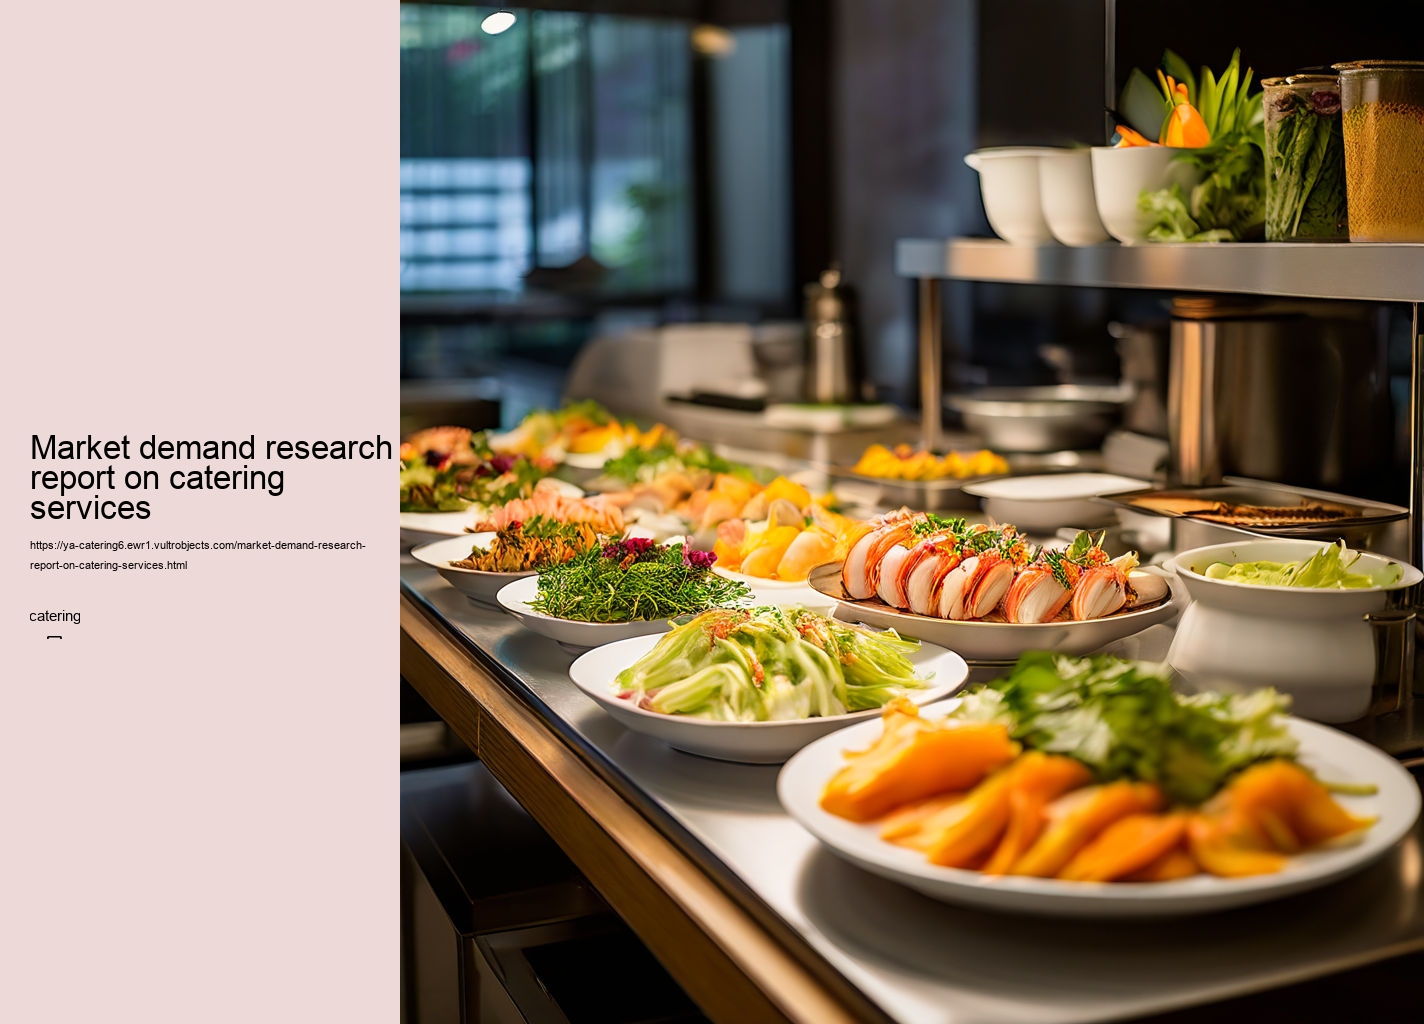 Market demand research report on catering services